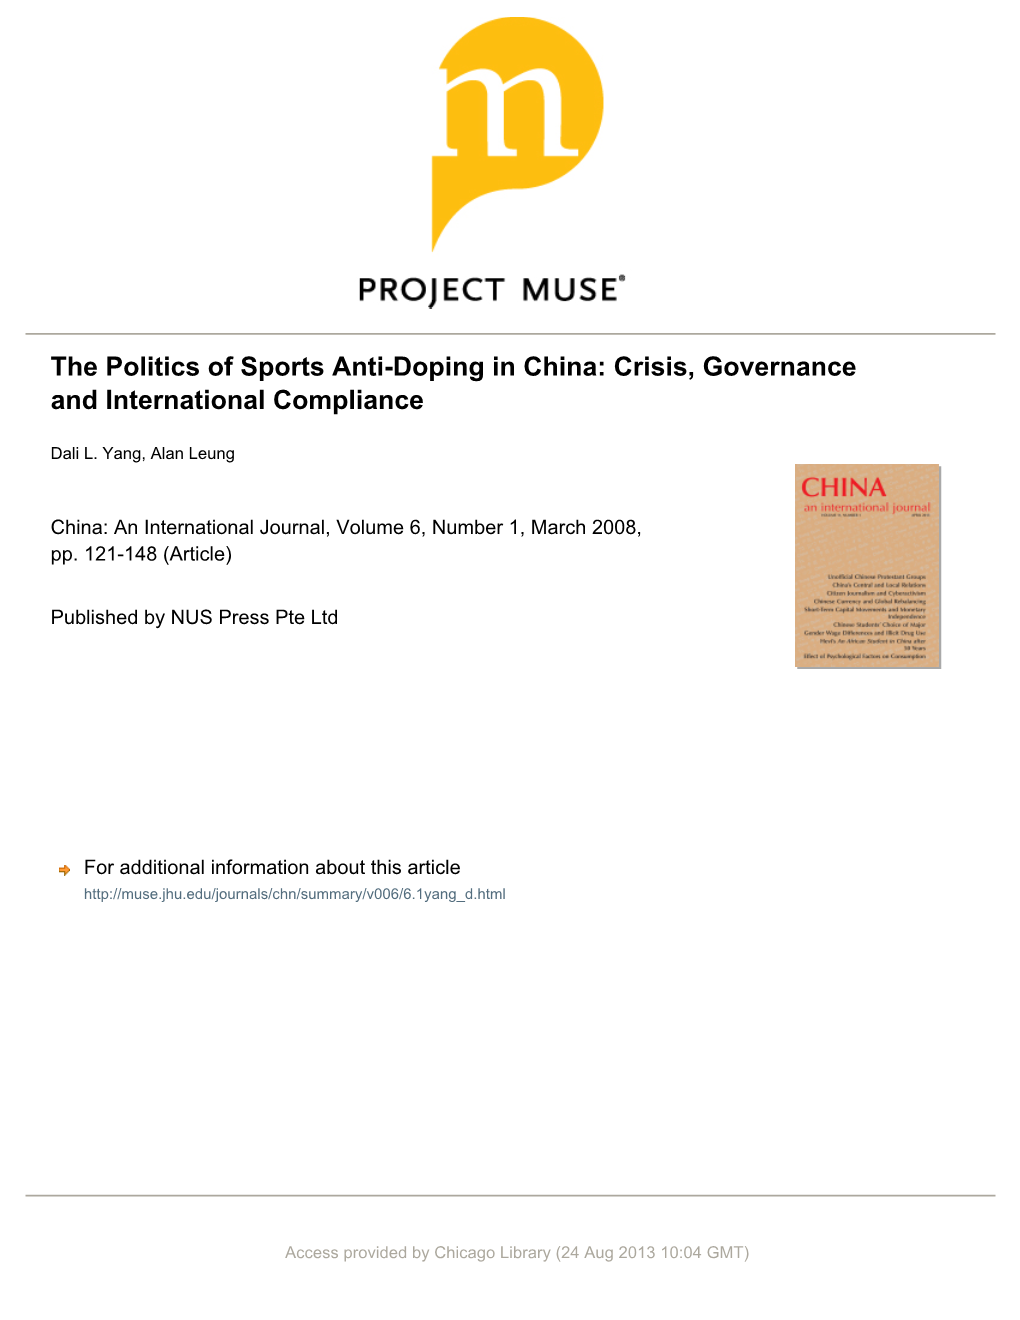 The Politics of Sports Anti-Doping in China: Crisis, Governance and International Compliance